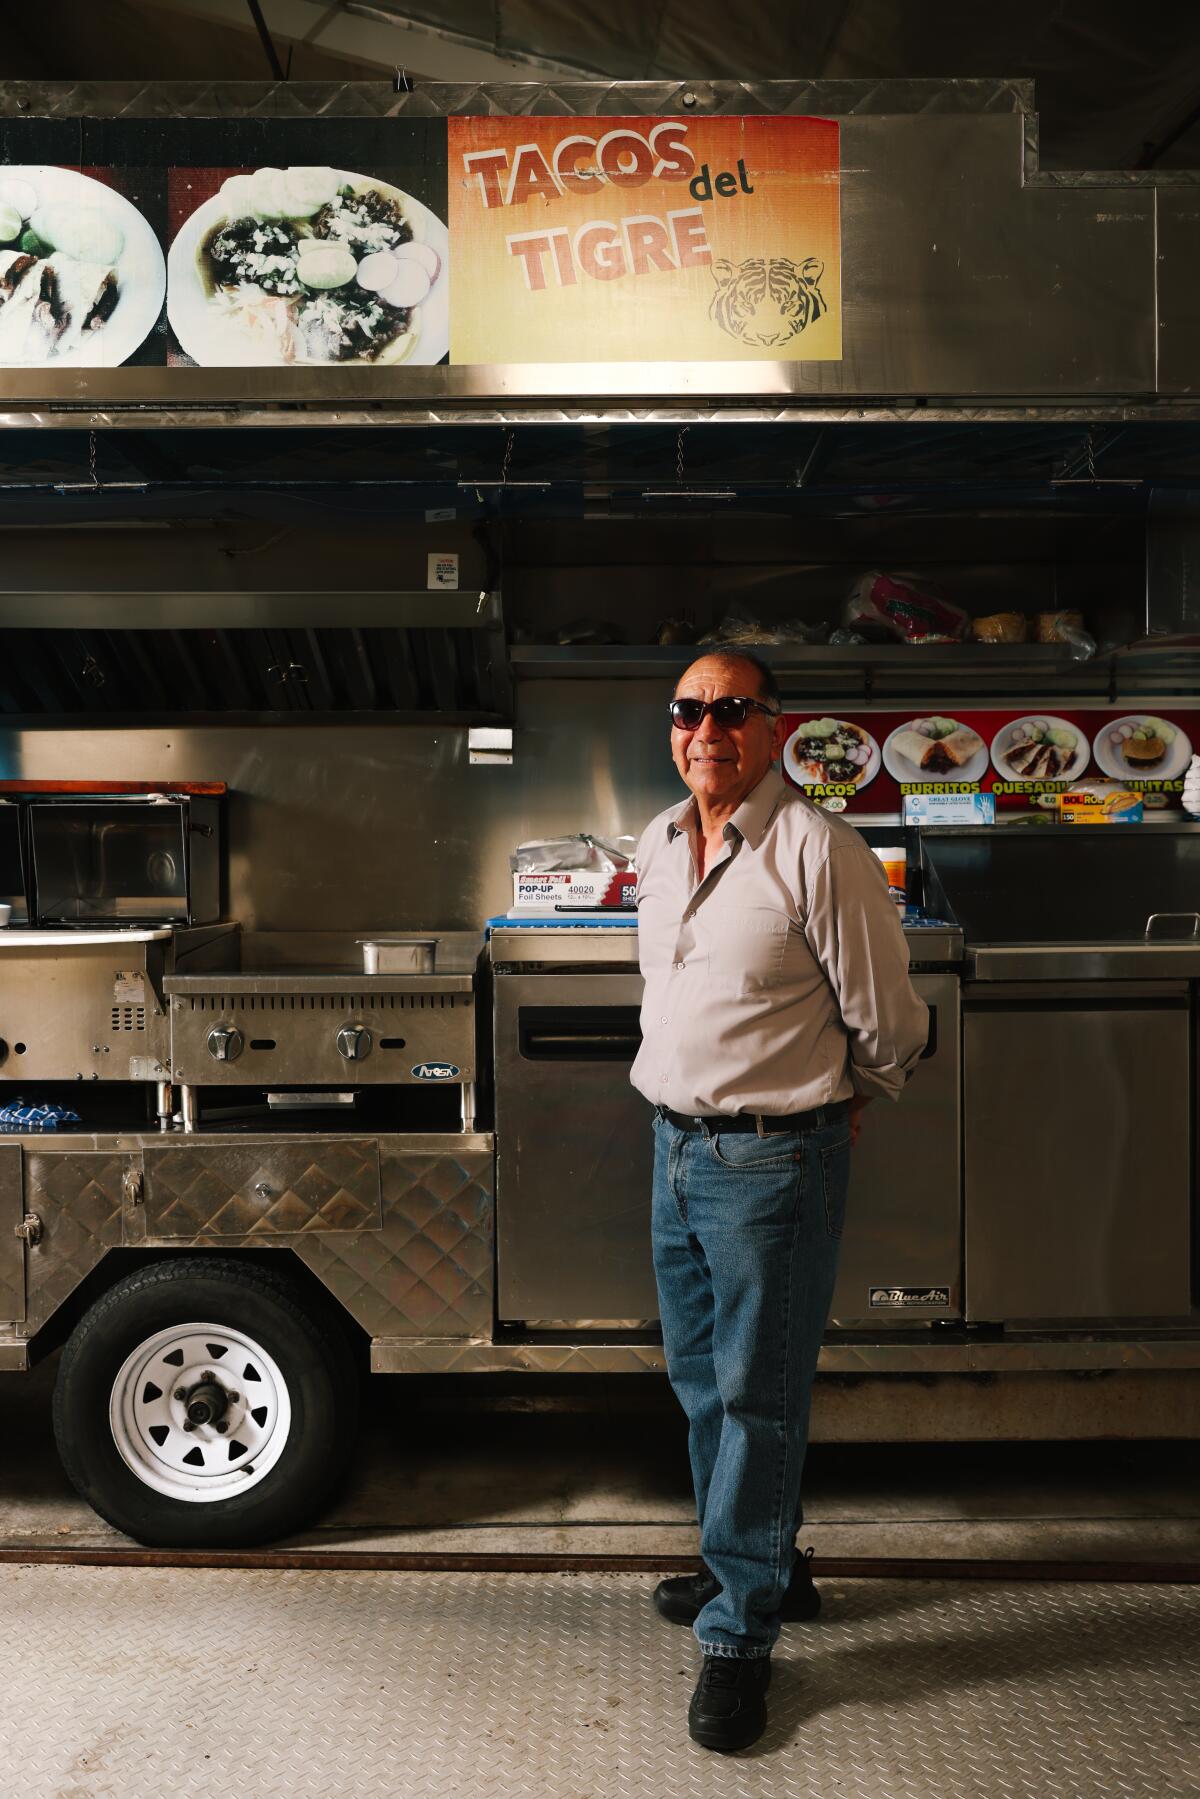 "I wanted to do things right, but this just isn’t working,” Ayala said of the taco business.